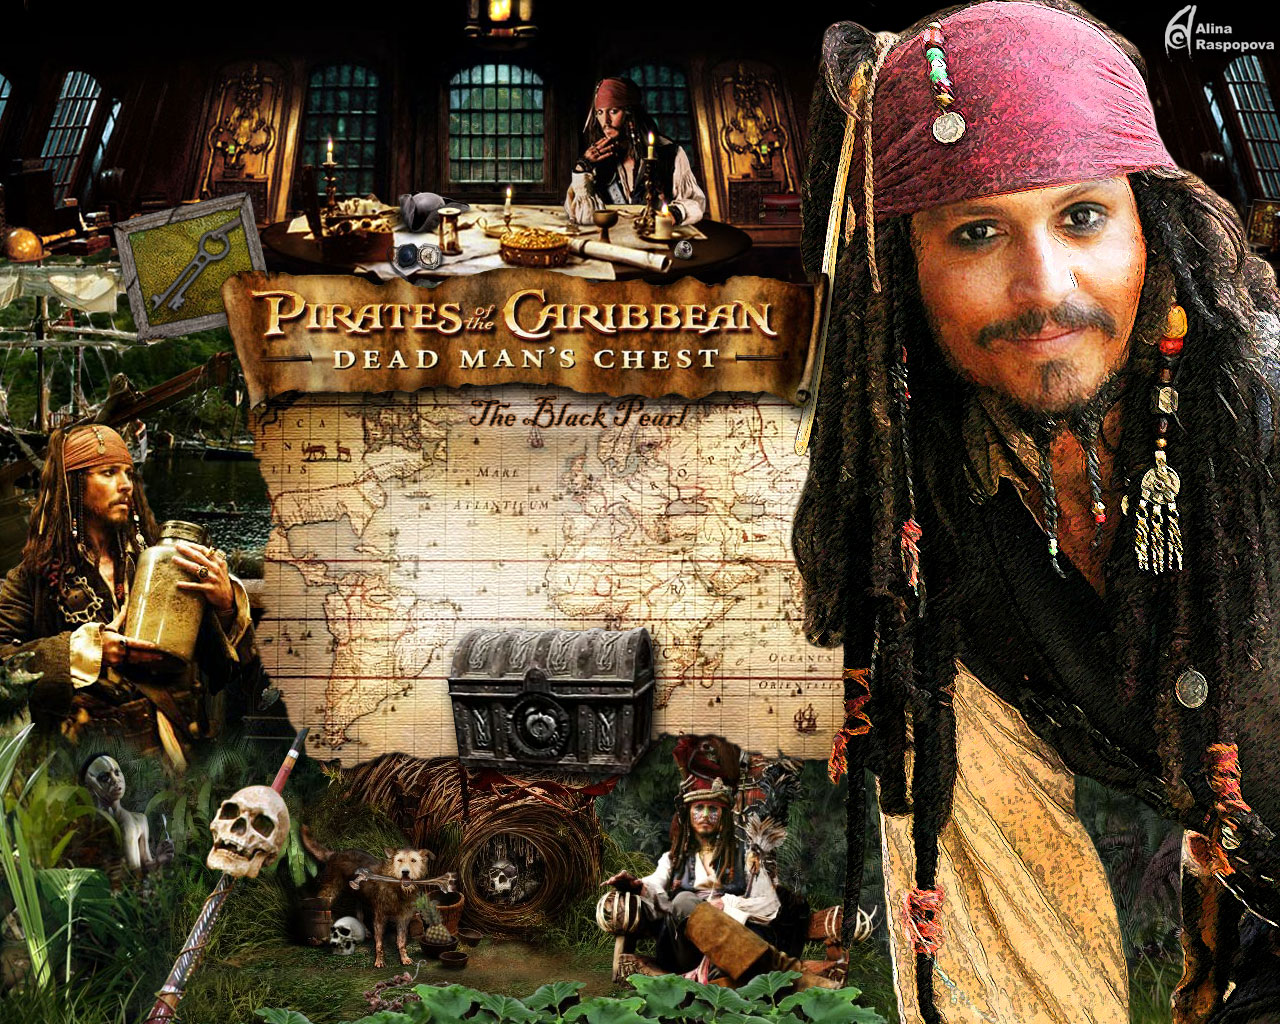 Download High quality Pirates Of The Caribbean wallpaper / Movies / 1280x1024